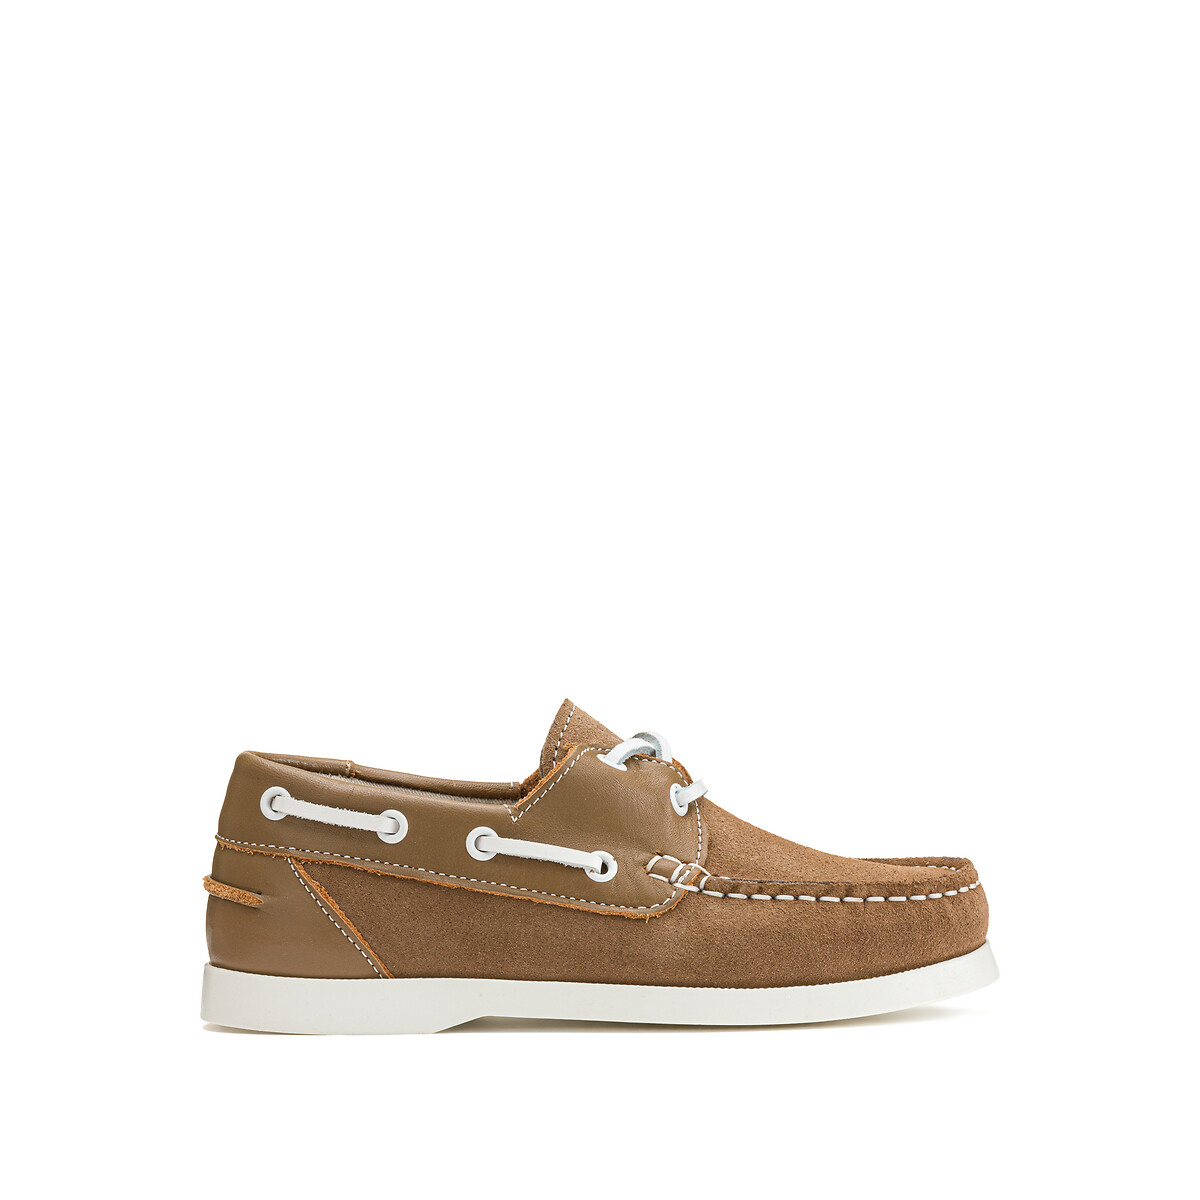 Suede/Leather Boat Shoes with Lace-Up Fastening